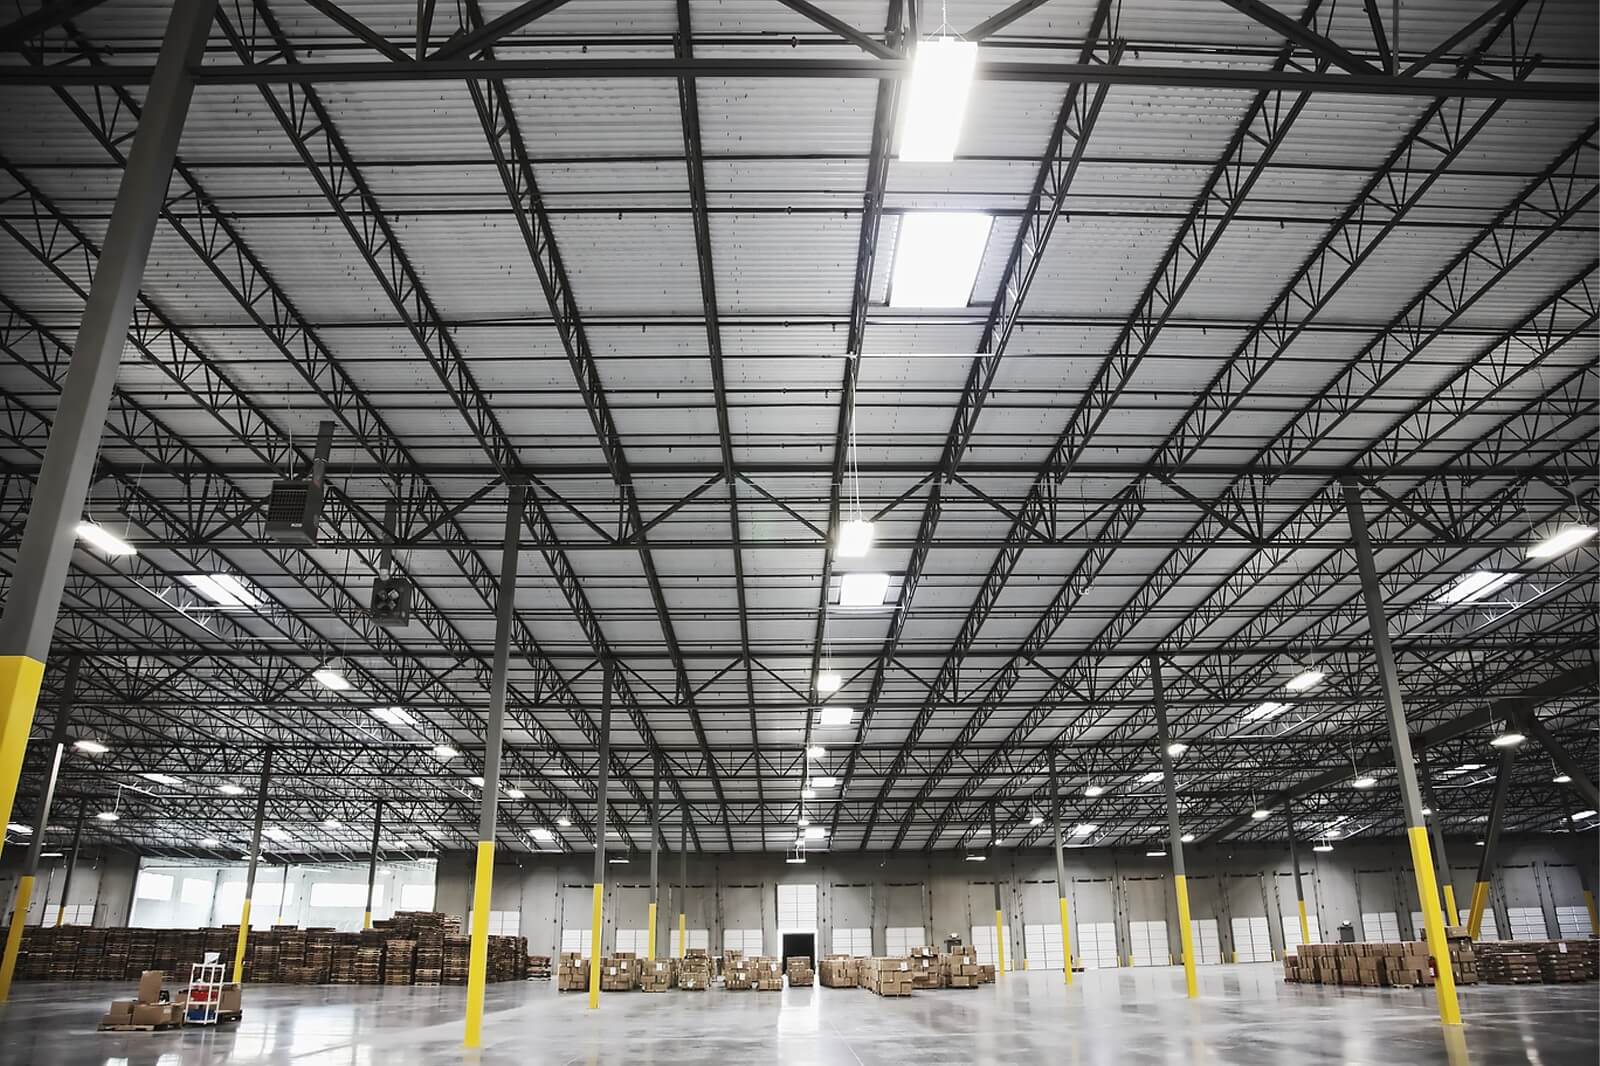 A spacious warehouse with high ceilings